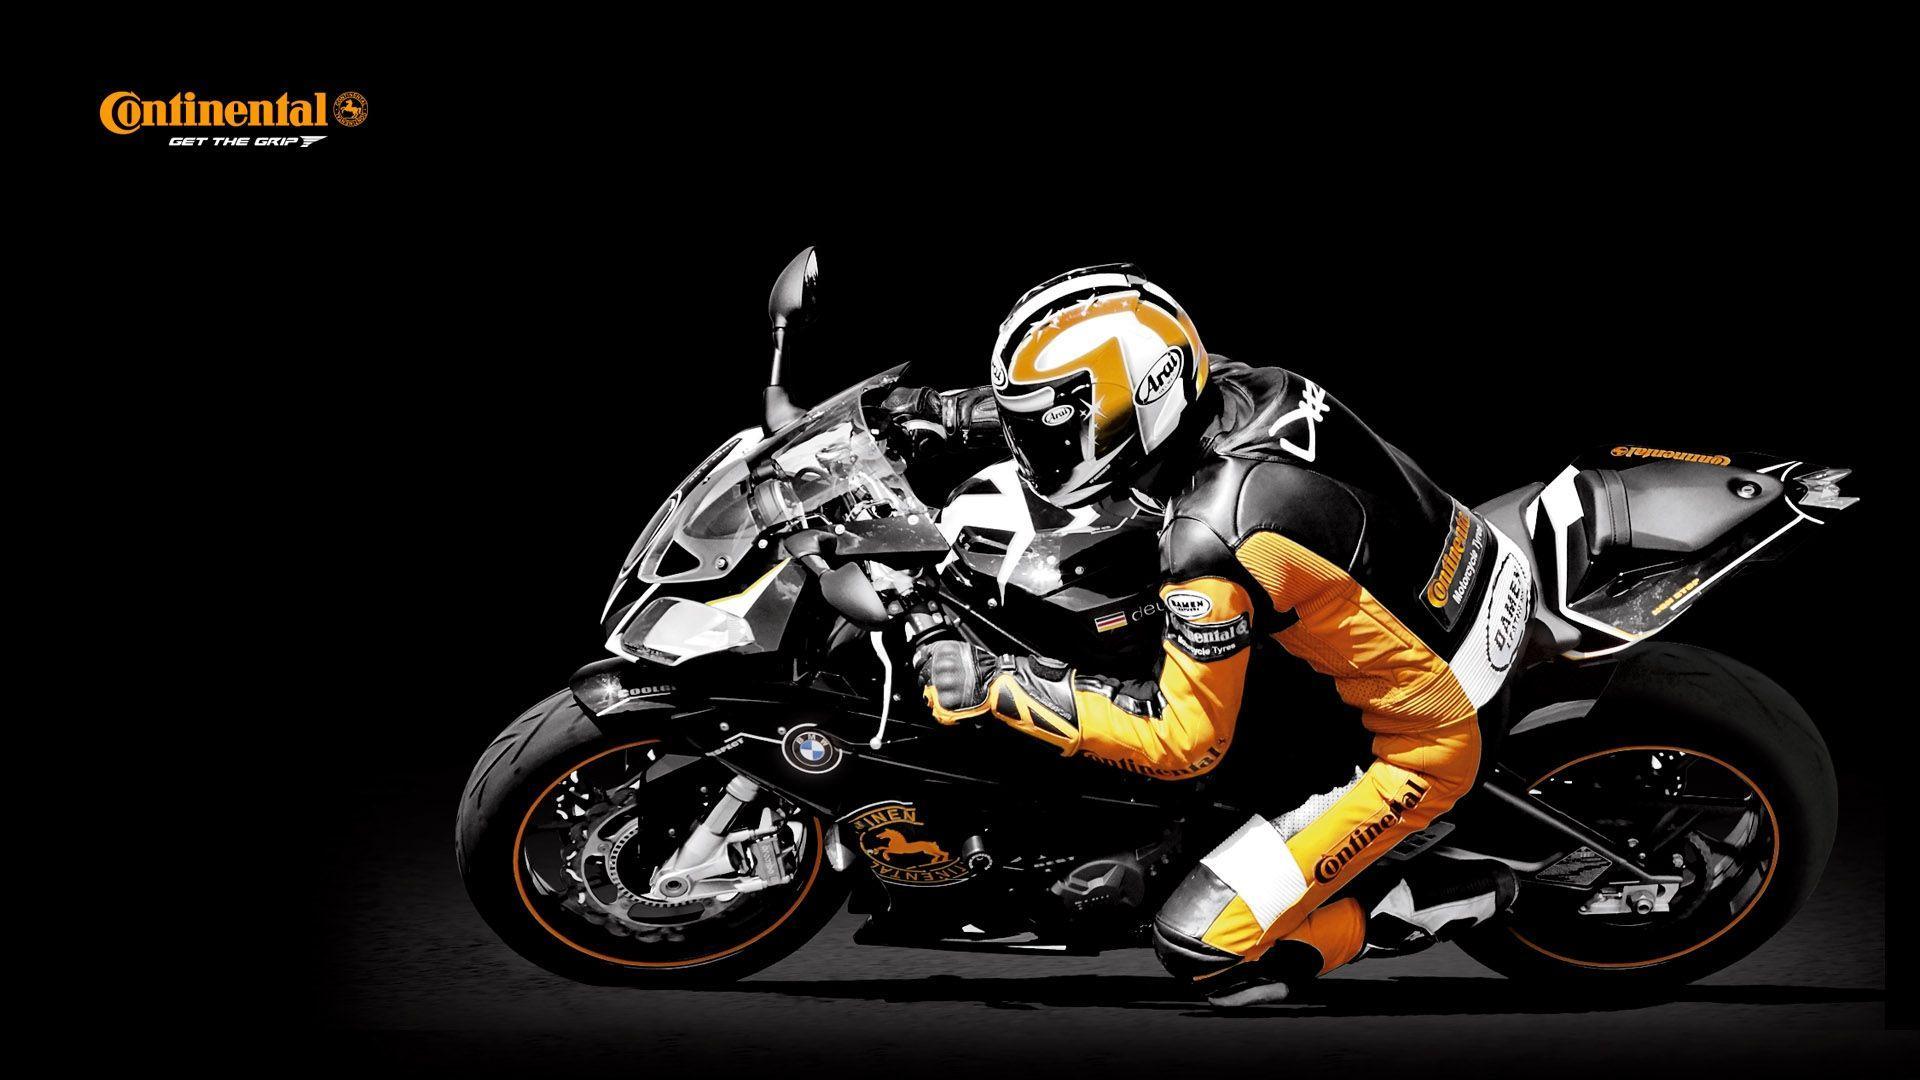 bmw motorcycle wallpaper bmw s1000rr contisportattack 2 fhd